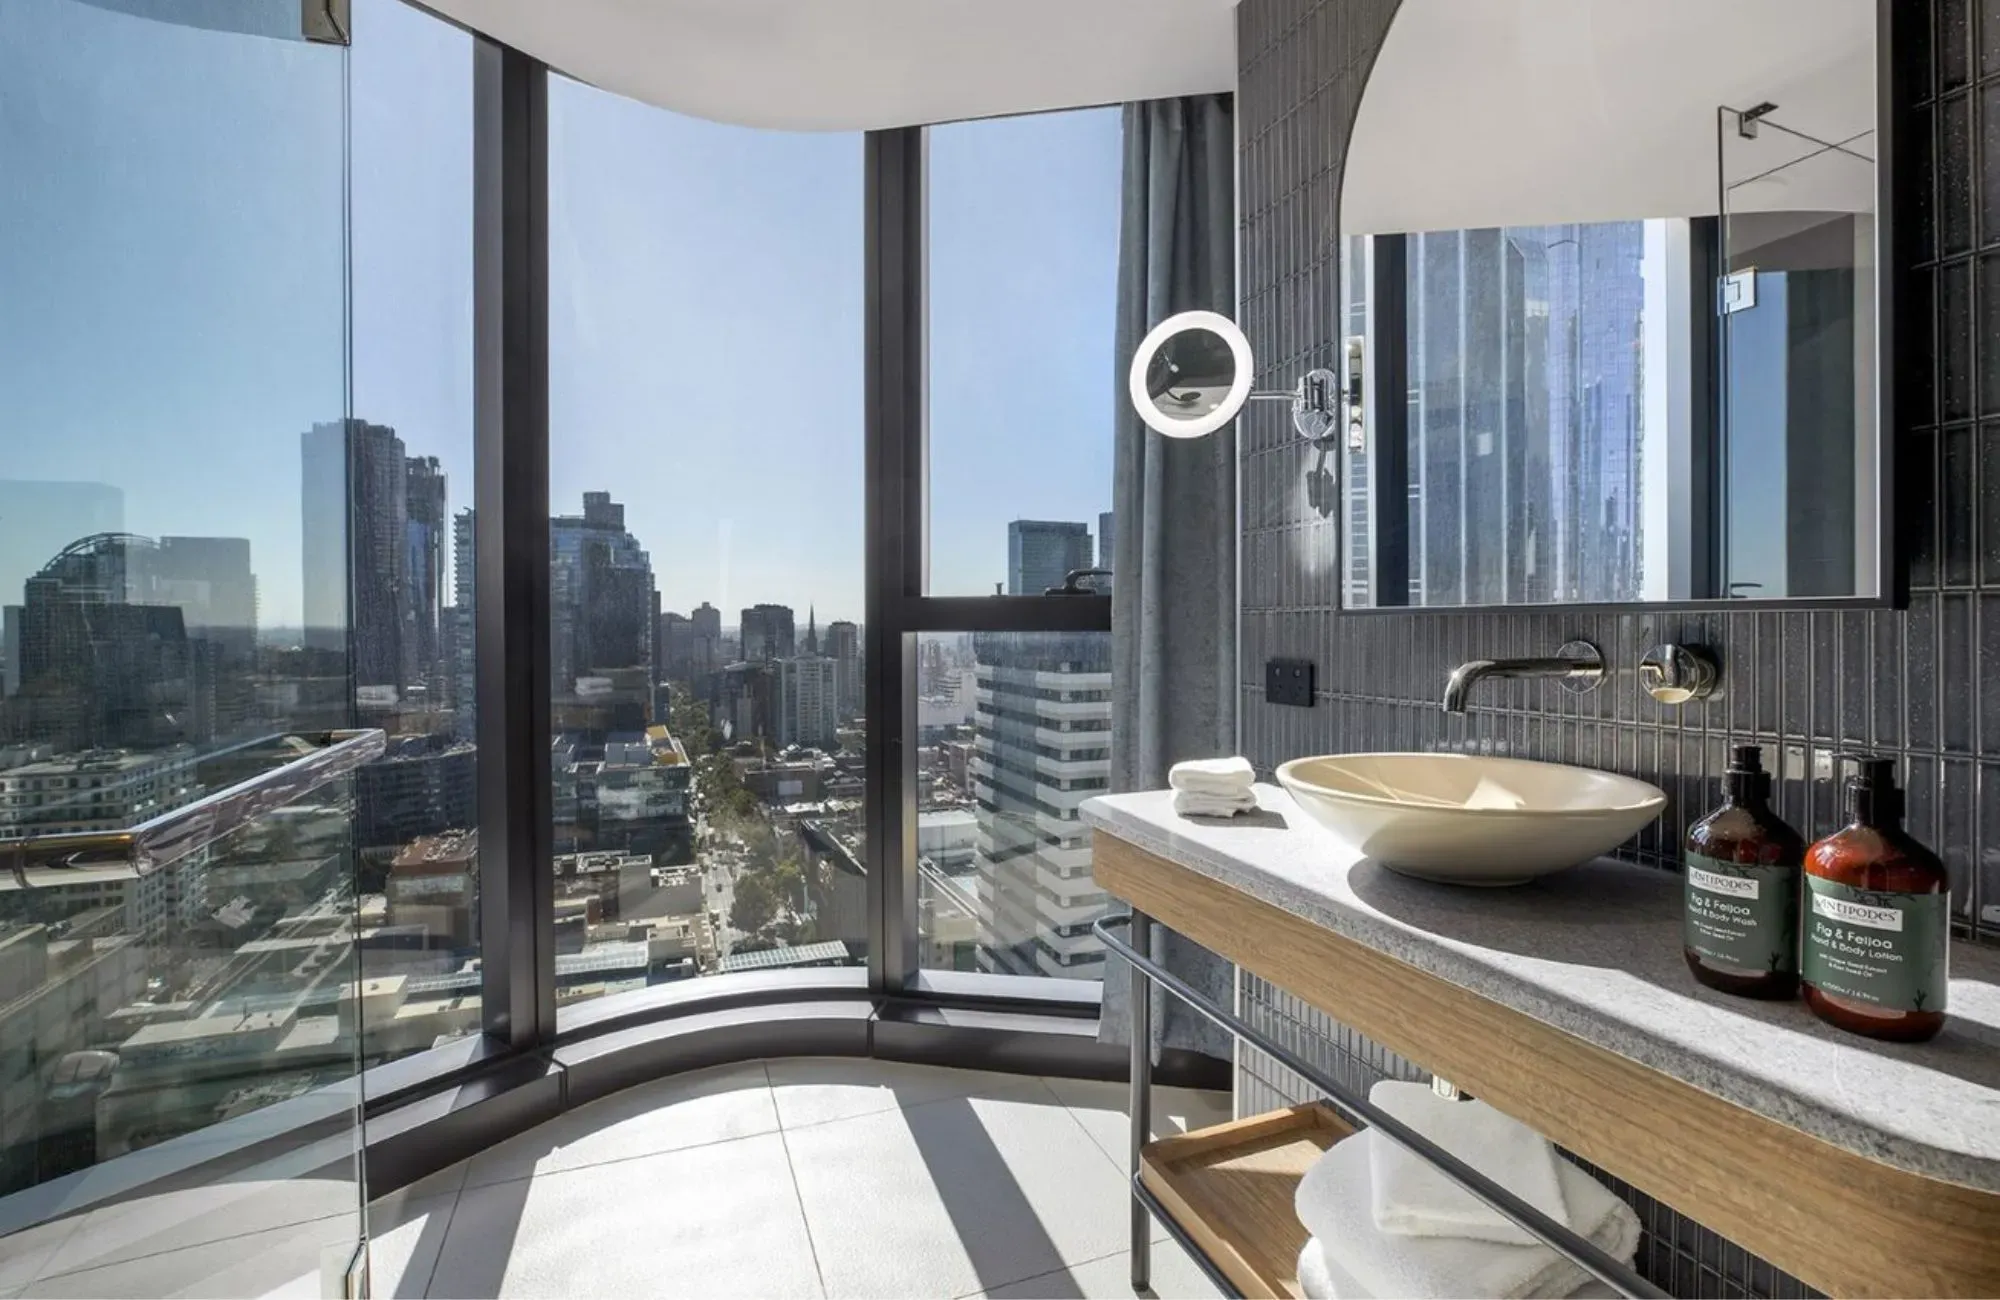 Voco Melbourne Central by IHG Hotels & Resorts. Guest bathroom, view out to city